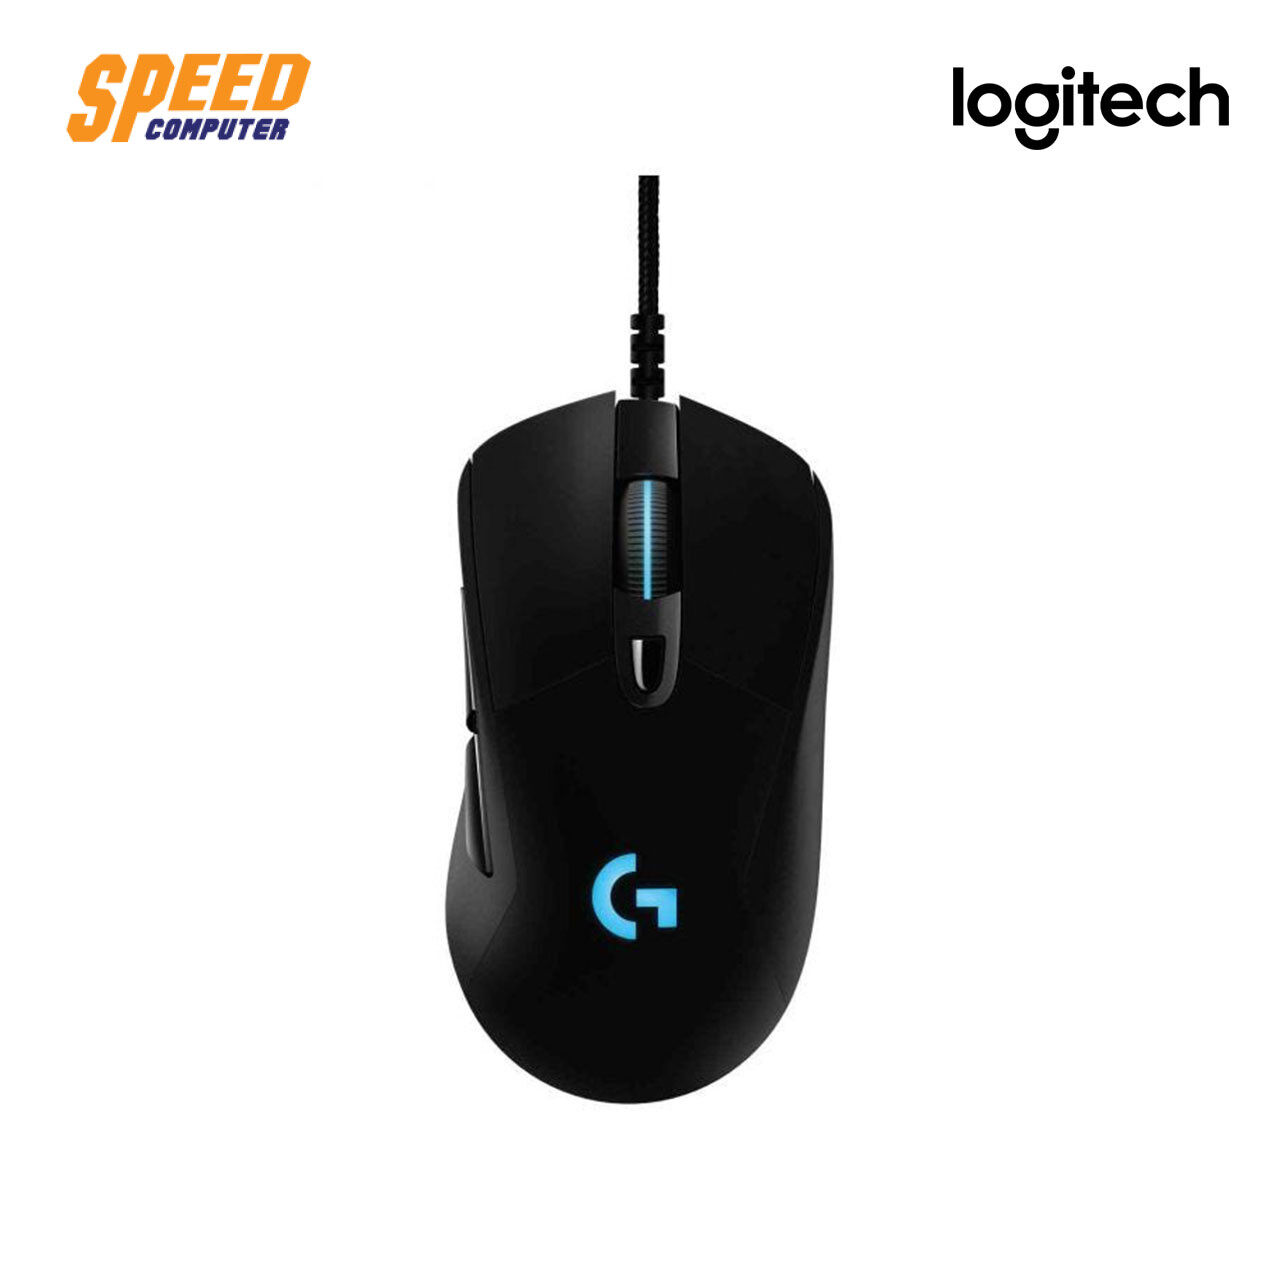 MOUSE (เมาส์) LOGITECH GAMING MOUSE G403 HERO GAMING MOUSE By Speedcom